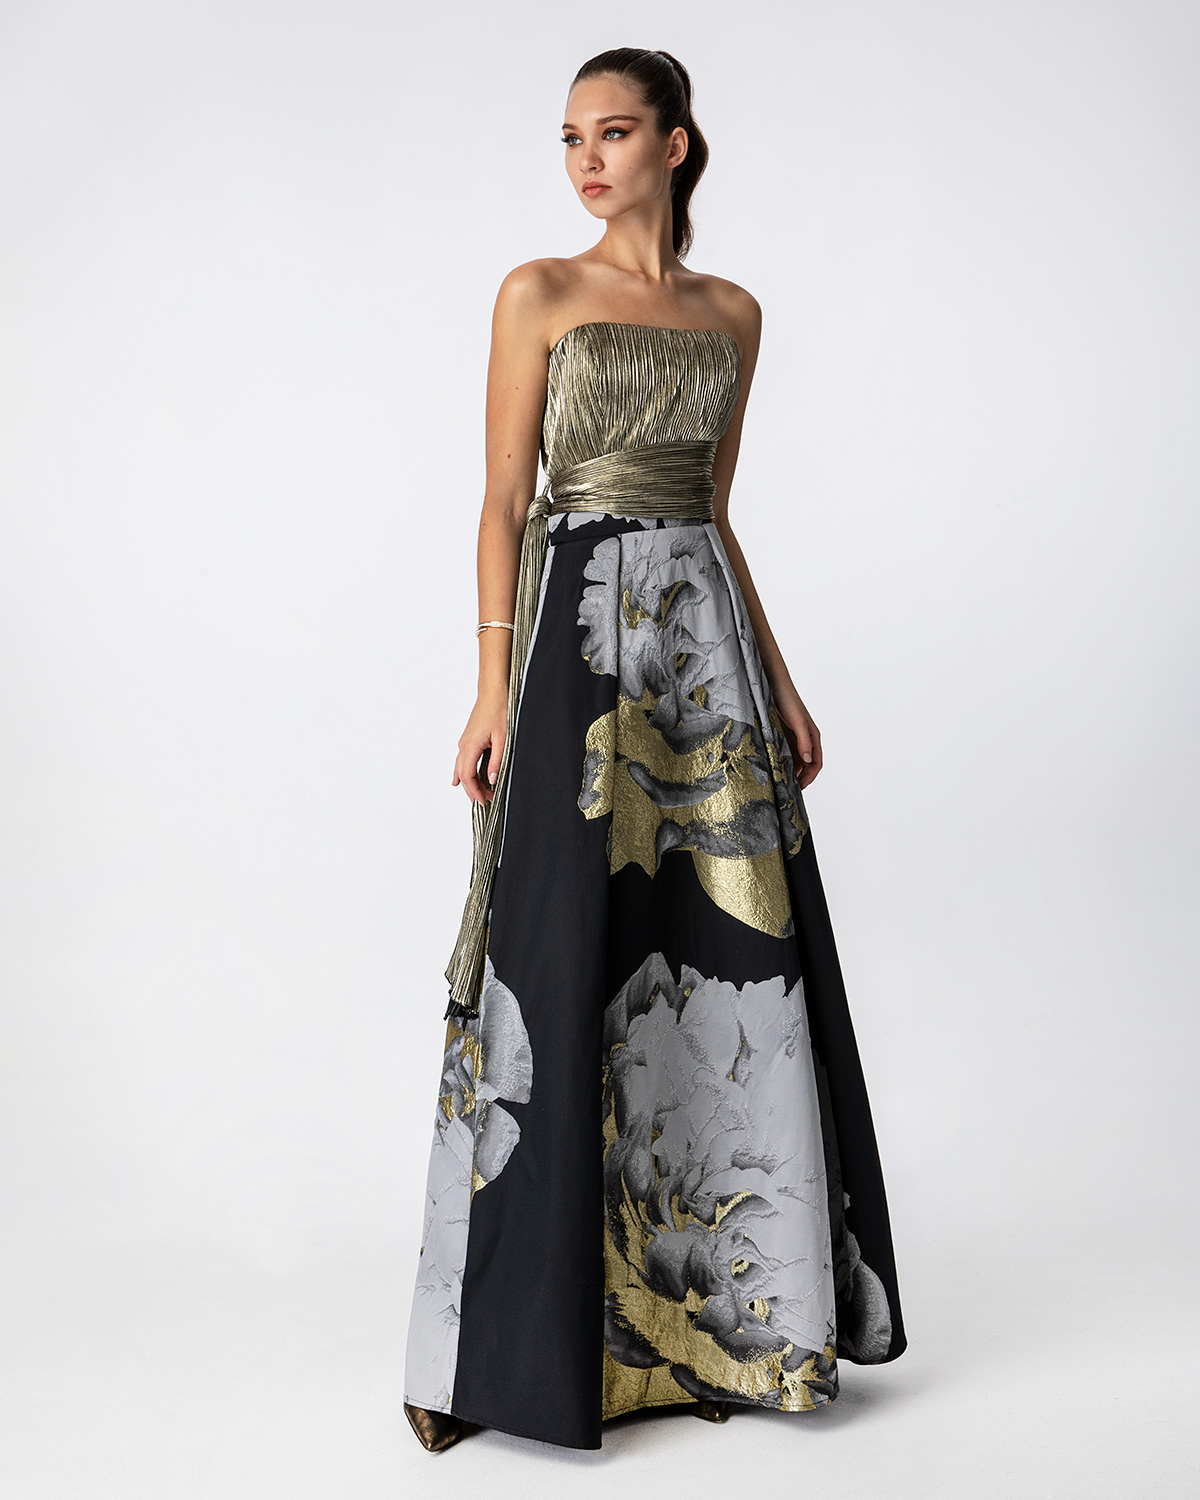 Cocktail Dresses / Long printed skirt with solid color lurex top